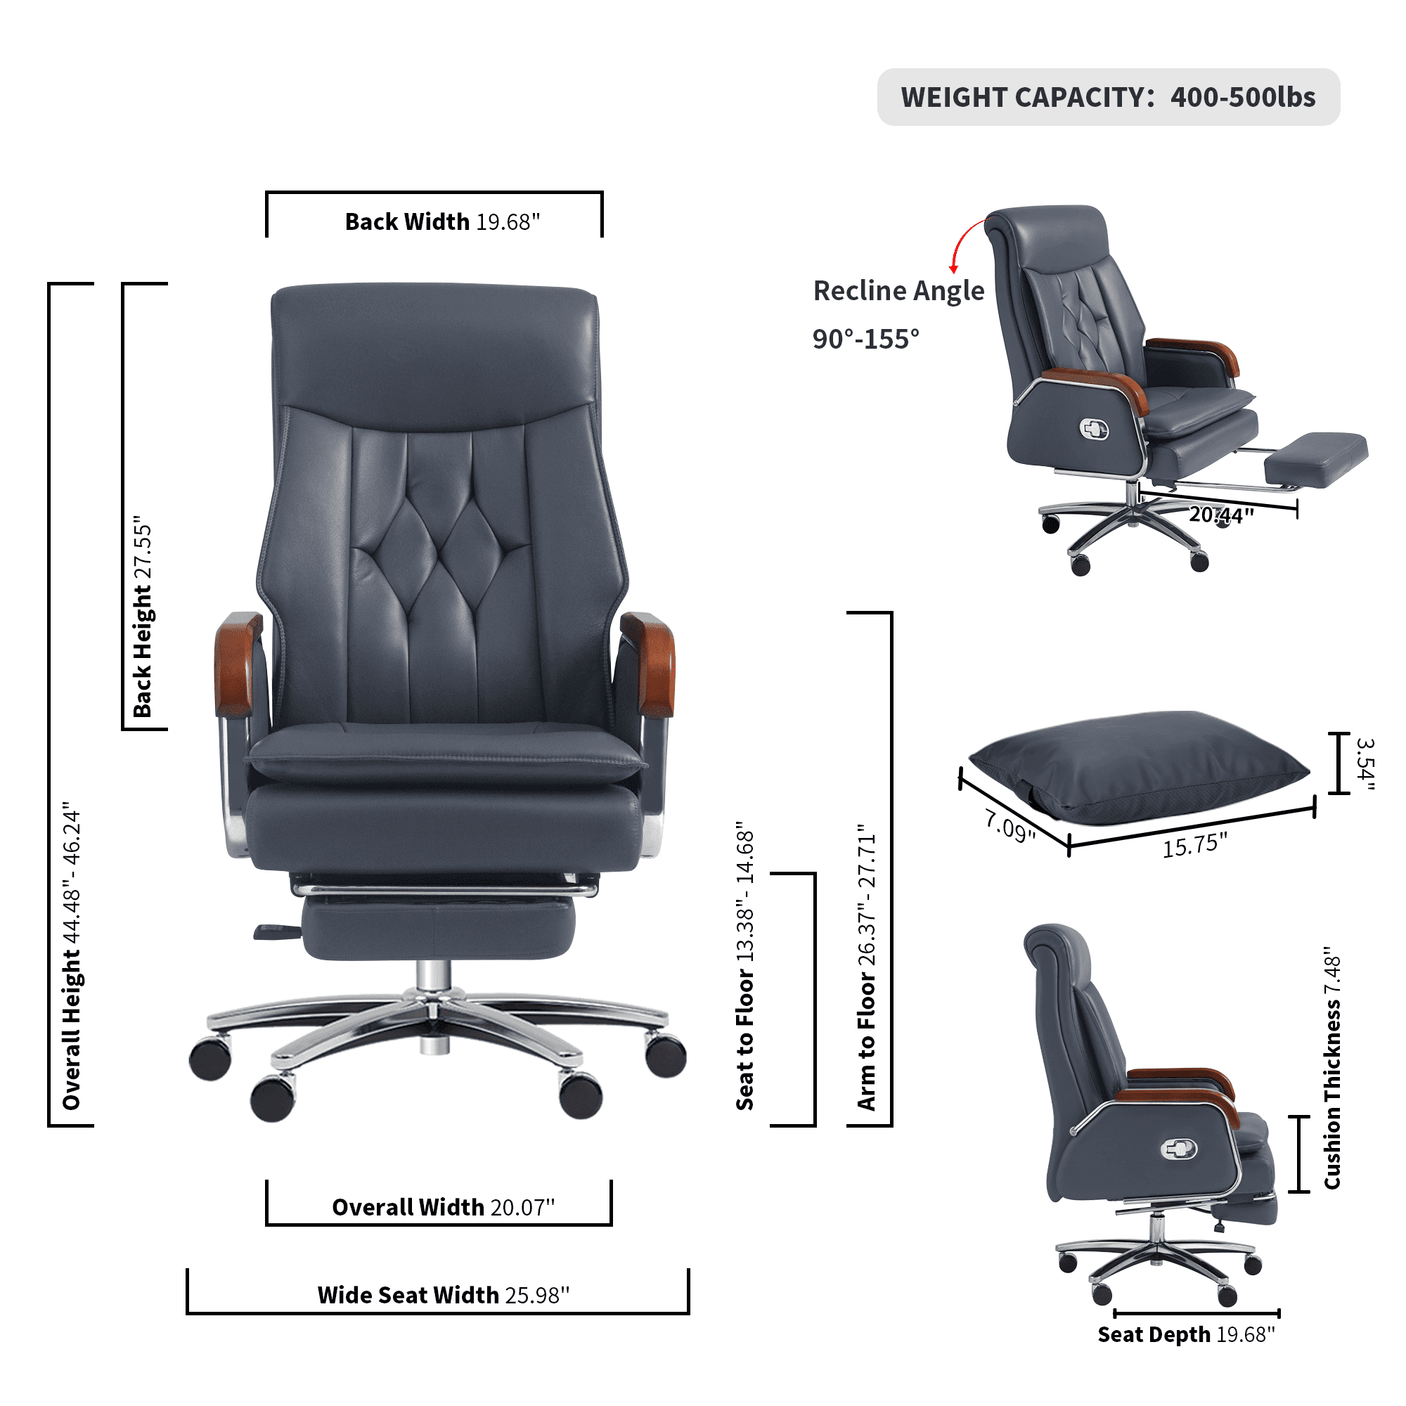 Cameron Massage Office Chair - grey - dimension